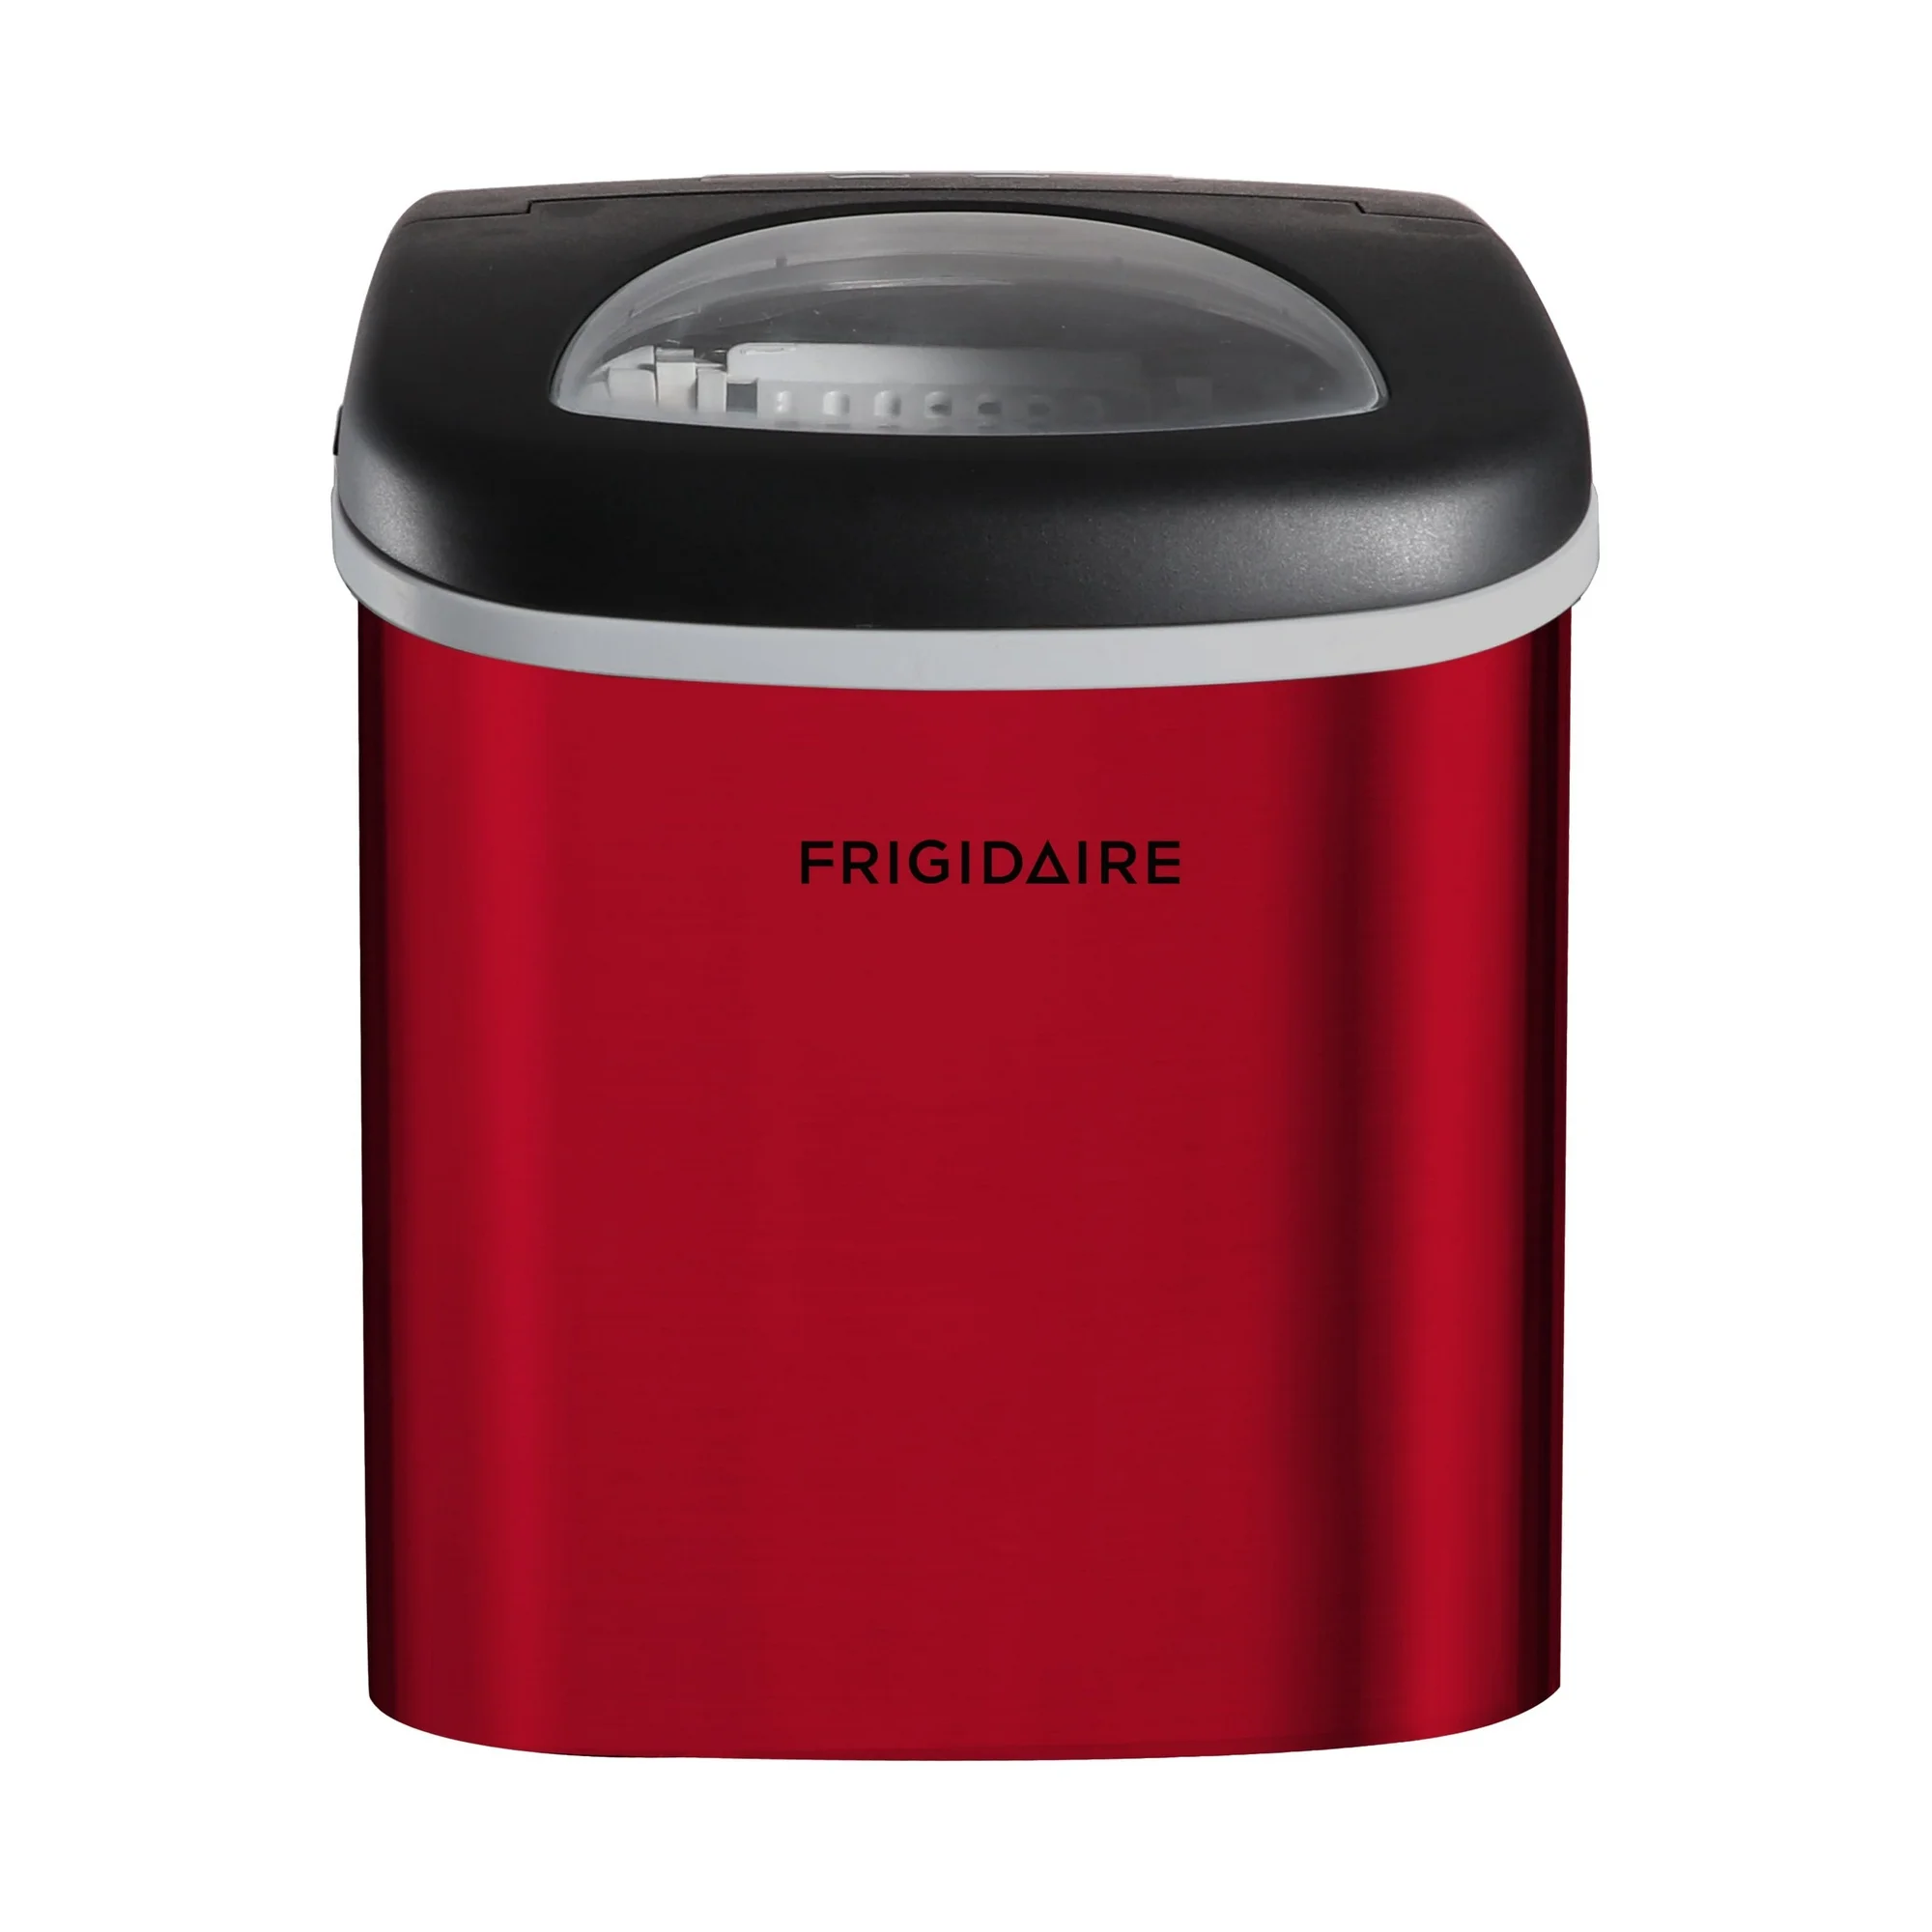 Frigidaire, 26 Lbs. Ice Maker, Red Stainless Steel - $220.00